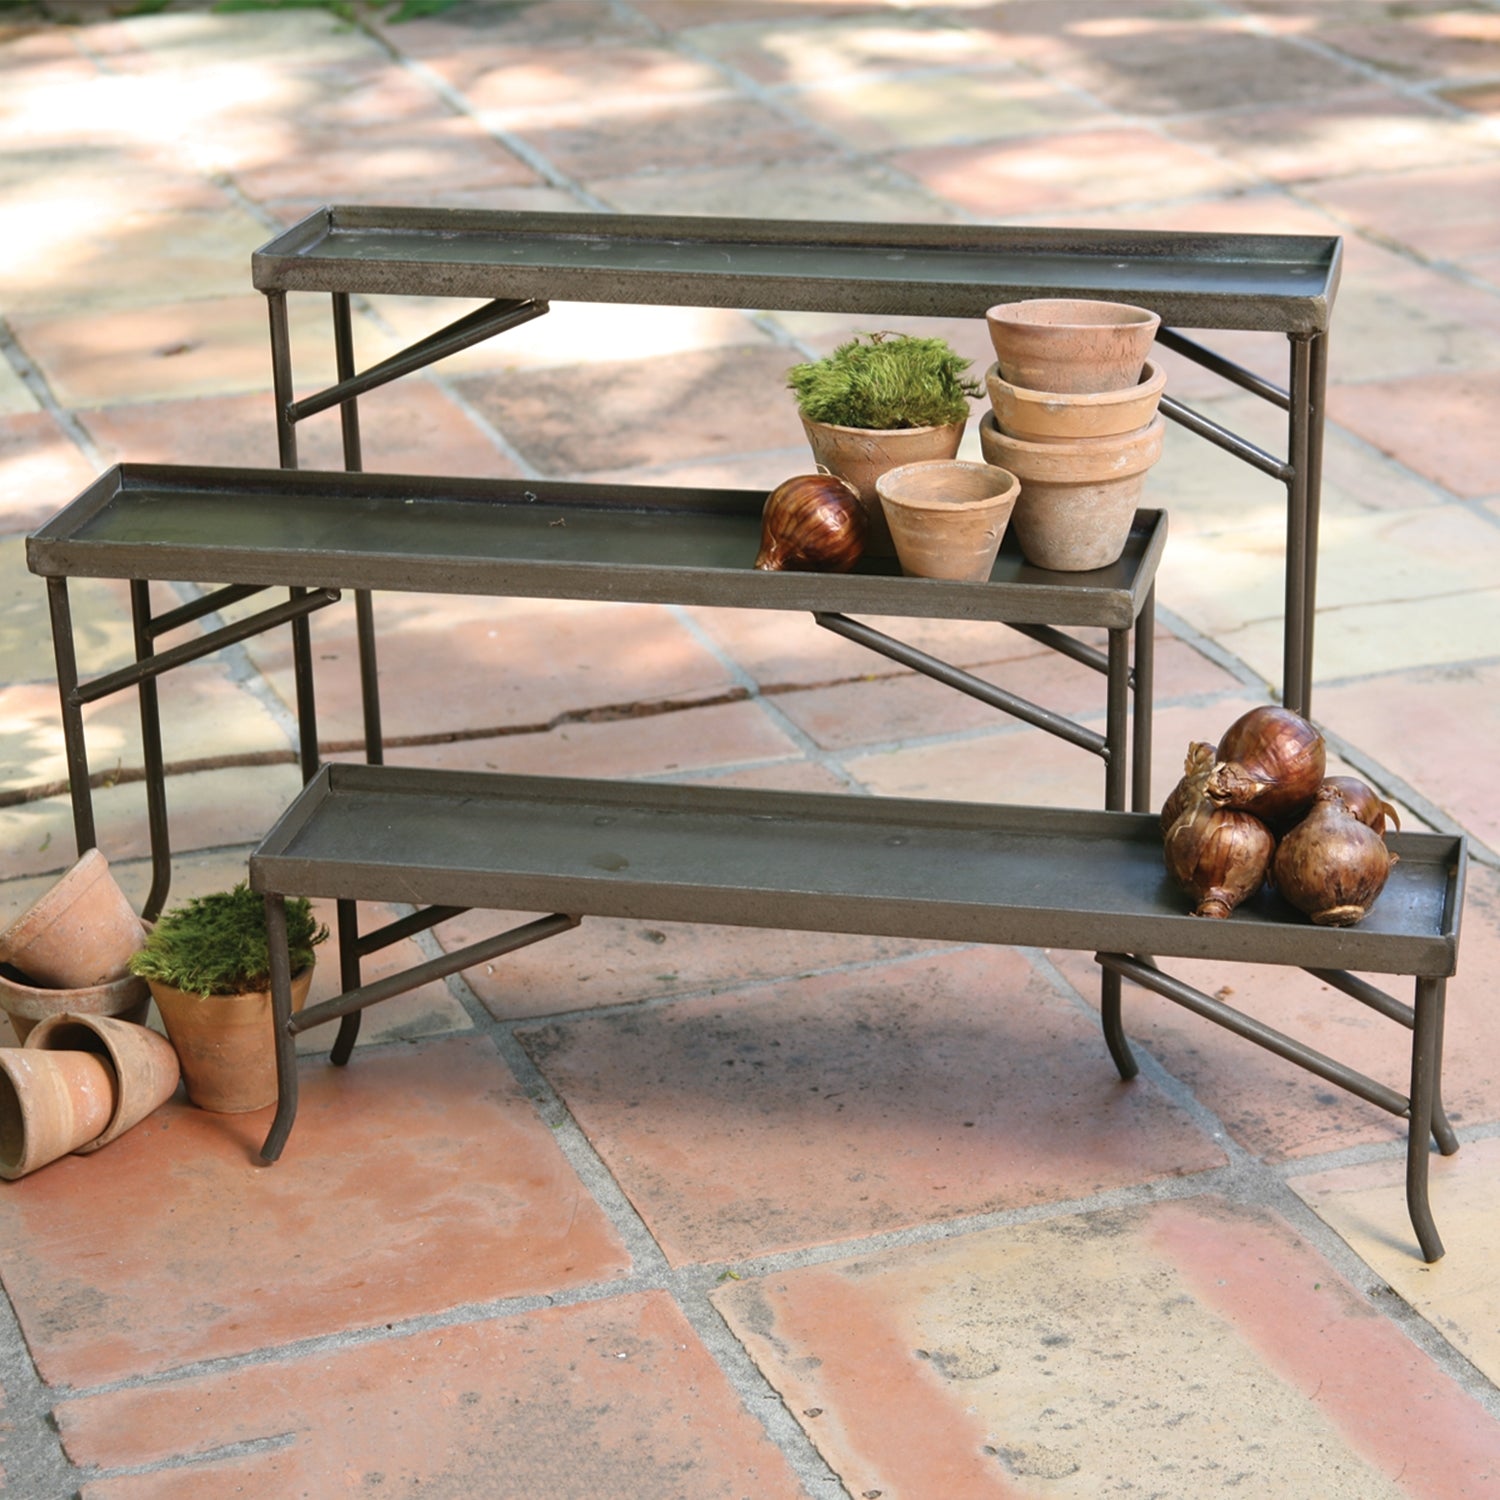 three forged iron racks on a patio styled with terra-cotta pots, plants, moss and onions